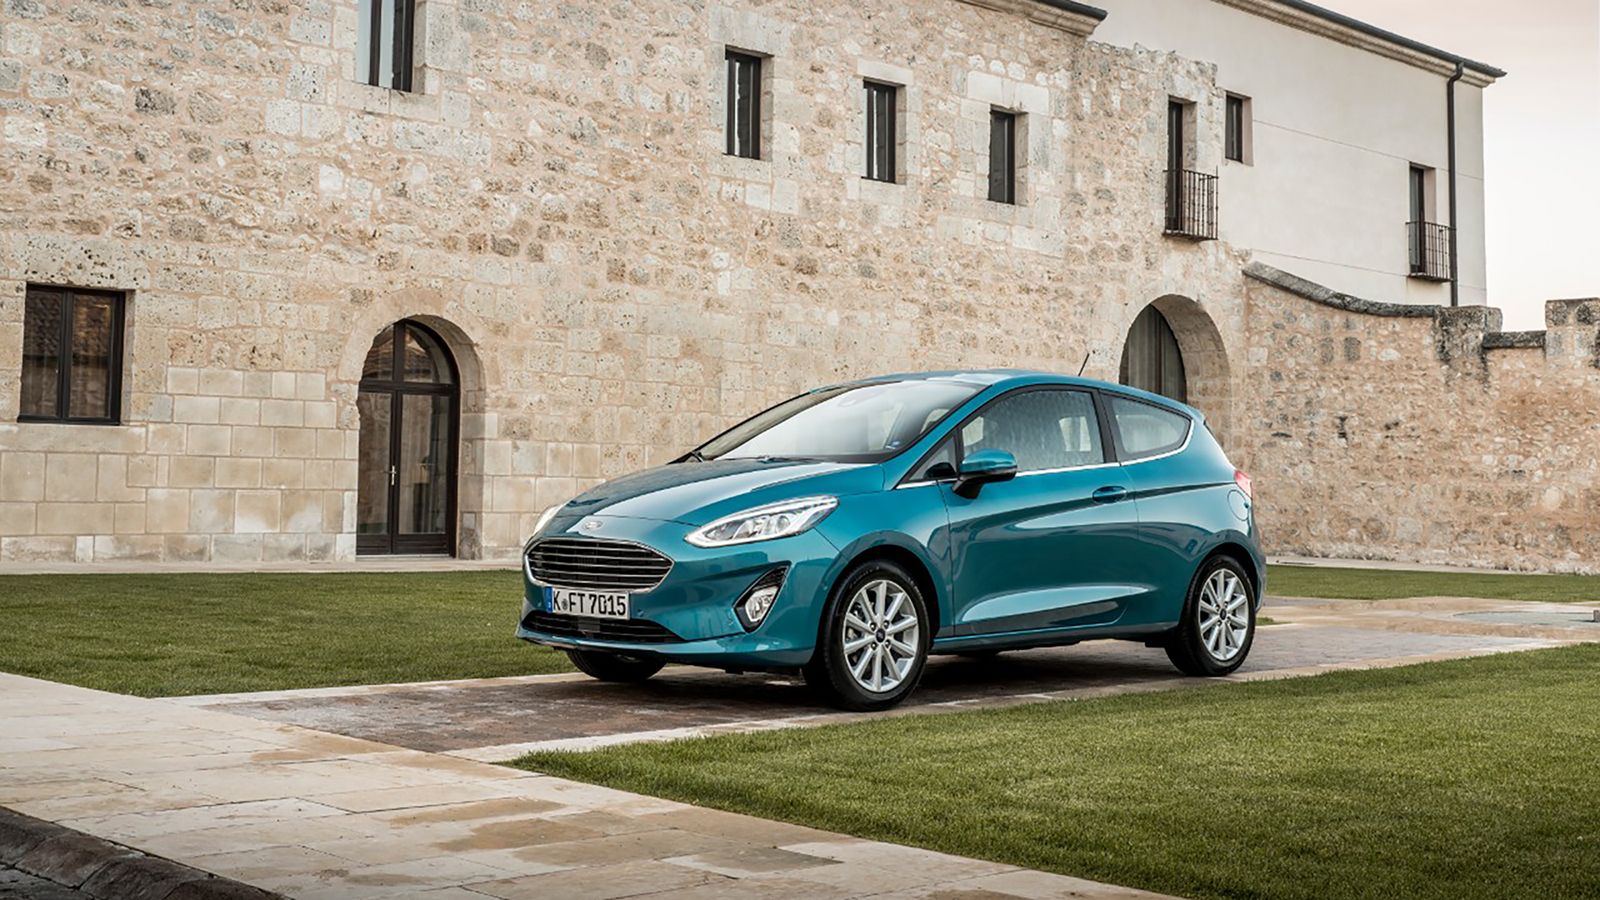 Next Generation Ford Fiesta – World's Most Technologically